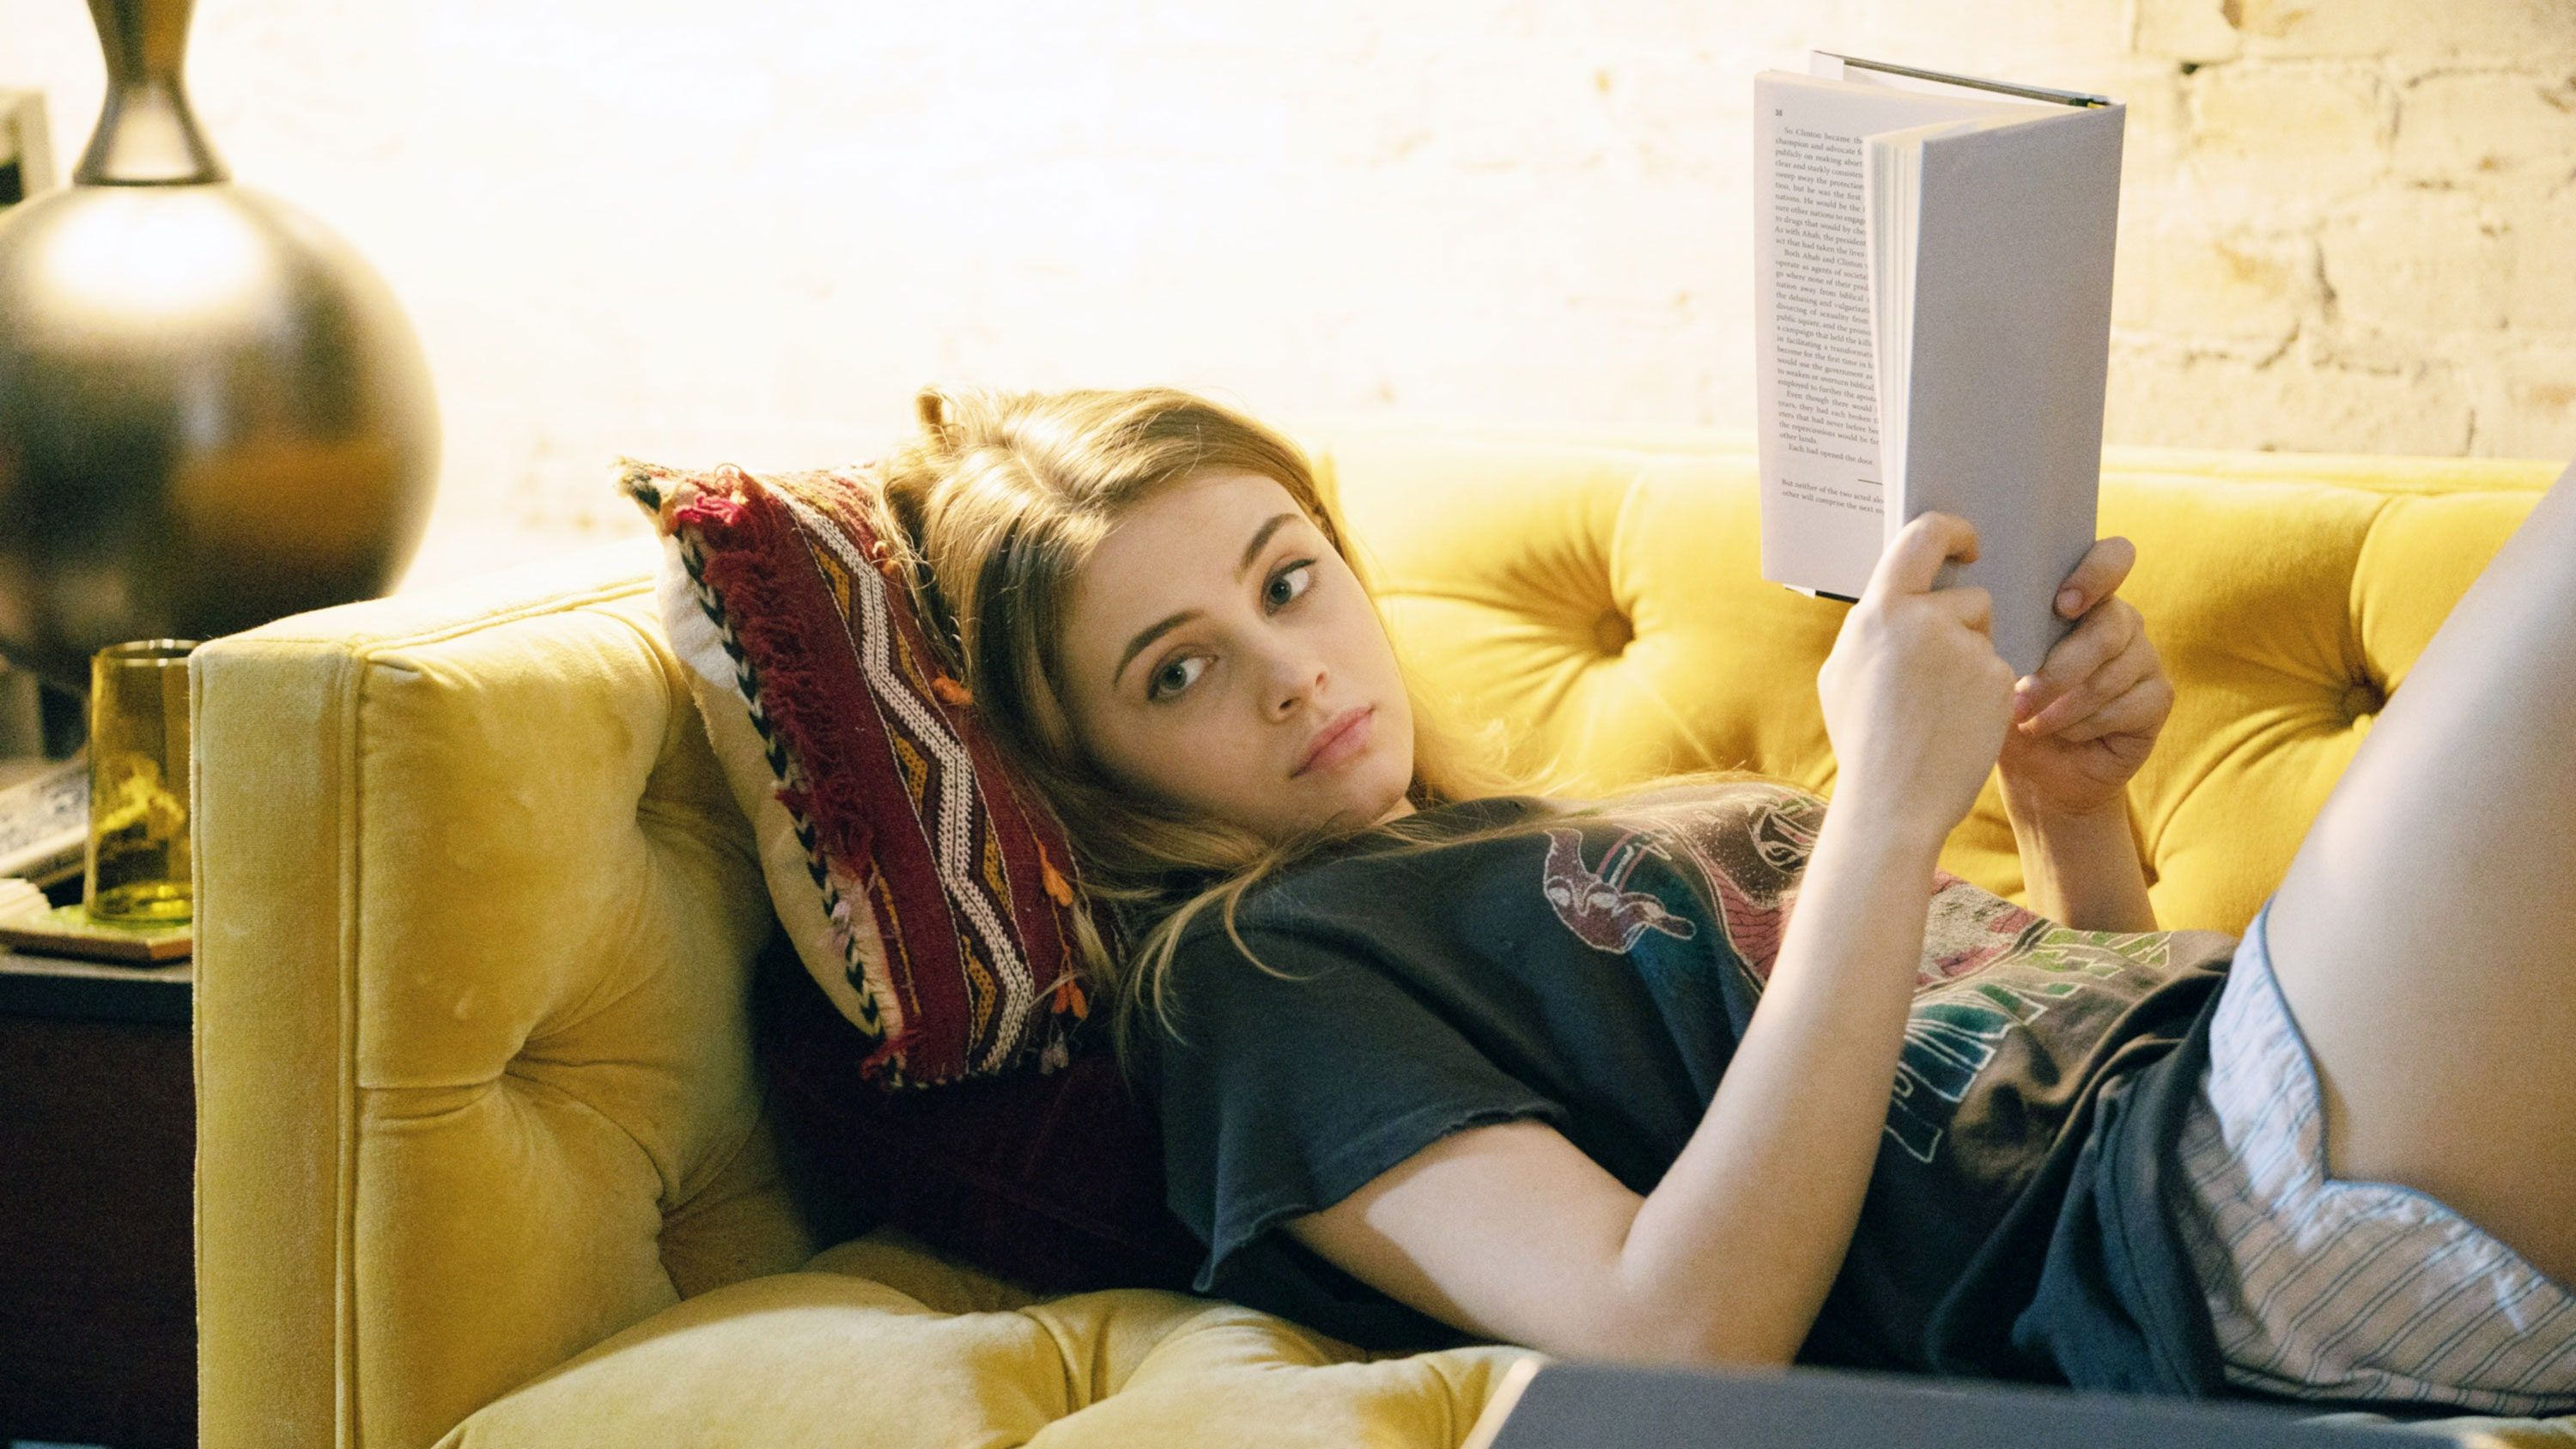 Josephine Langford on the Romance of After, Bringing Tessa to